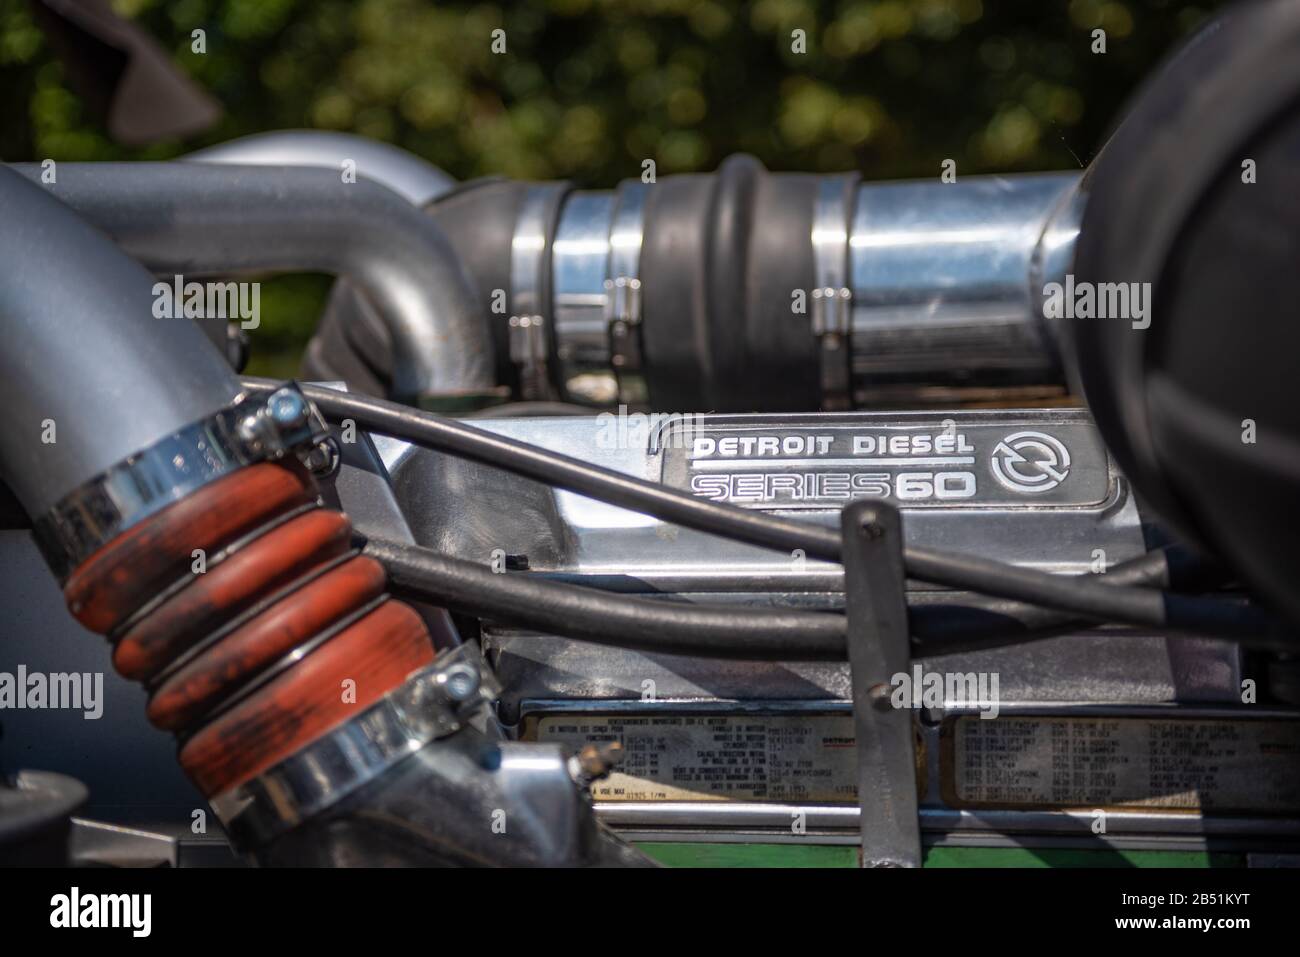 Detroit diesel truck engine at The Rally of the Giants, classic American car show, in the grounds of Blenheim Palace, Woodstock. Stock Photo